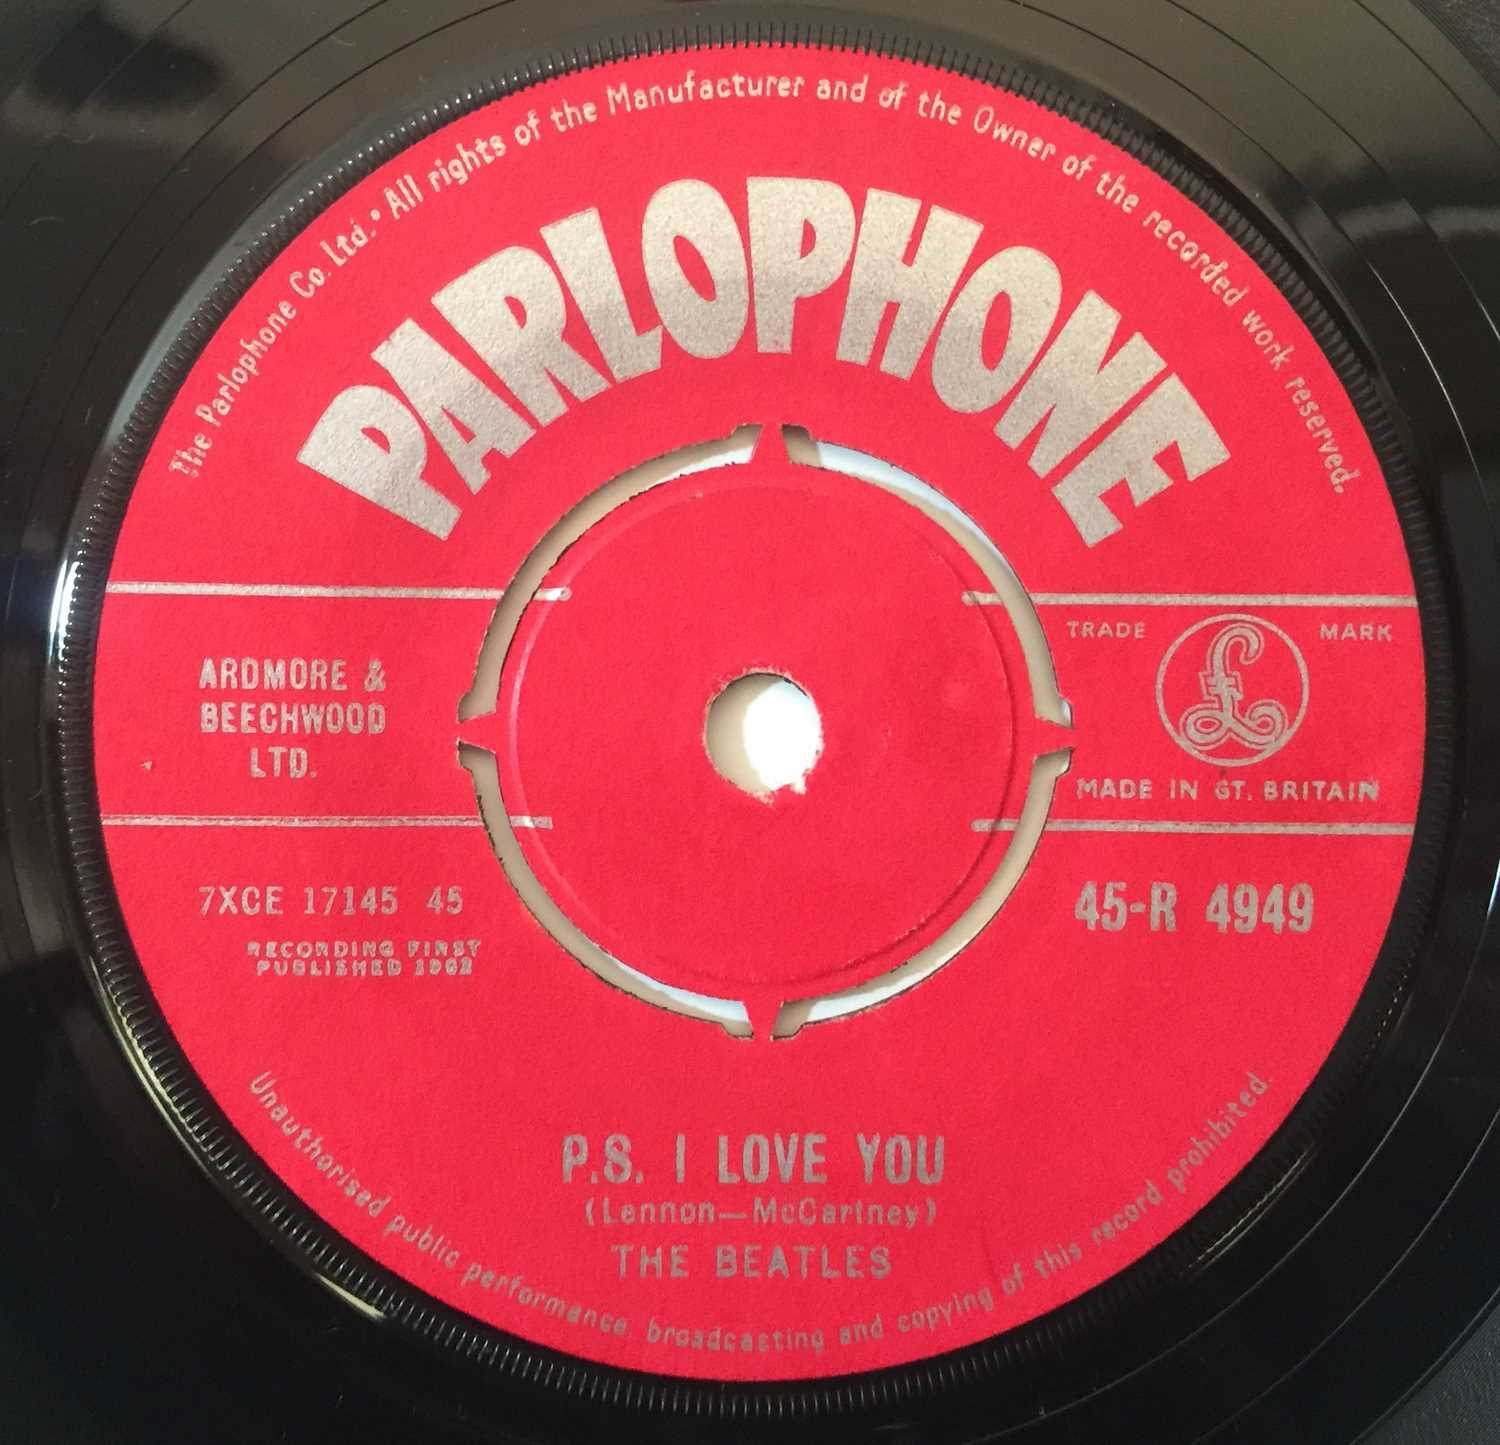 The Beatles - Love Me Do 7" (1st UK Pressing - Parlophone 45-R 4949) - Image 3 of 3